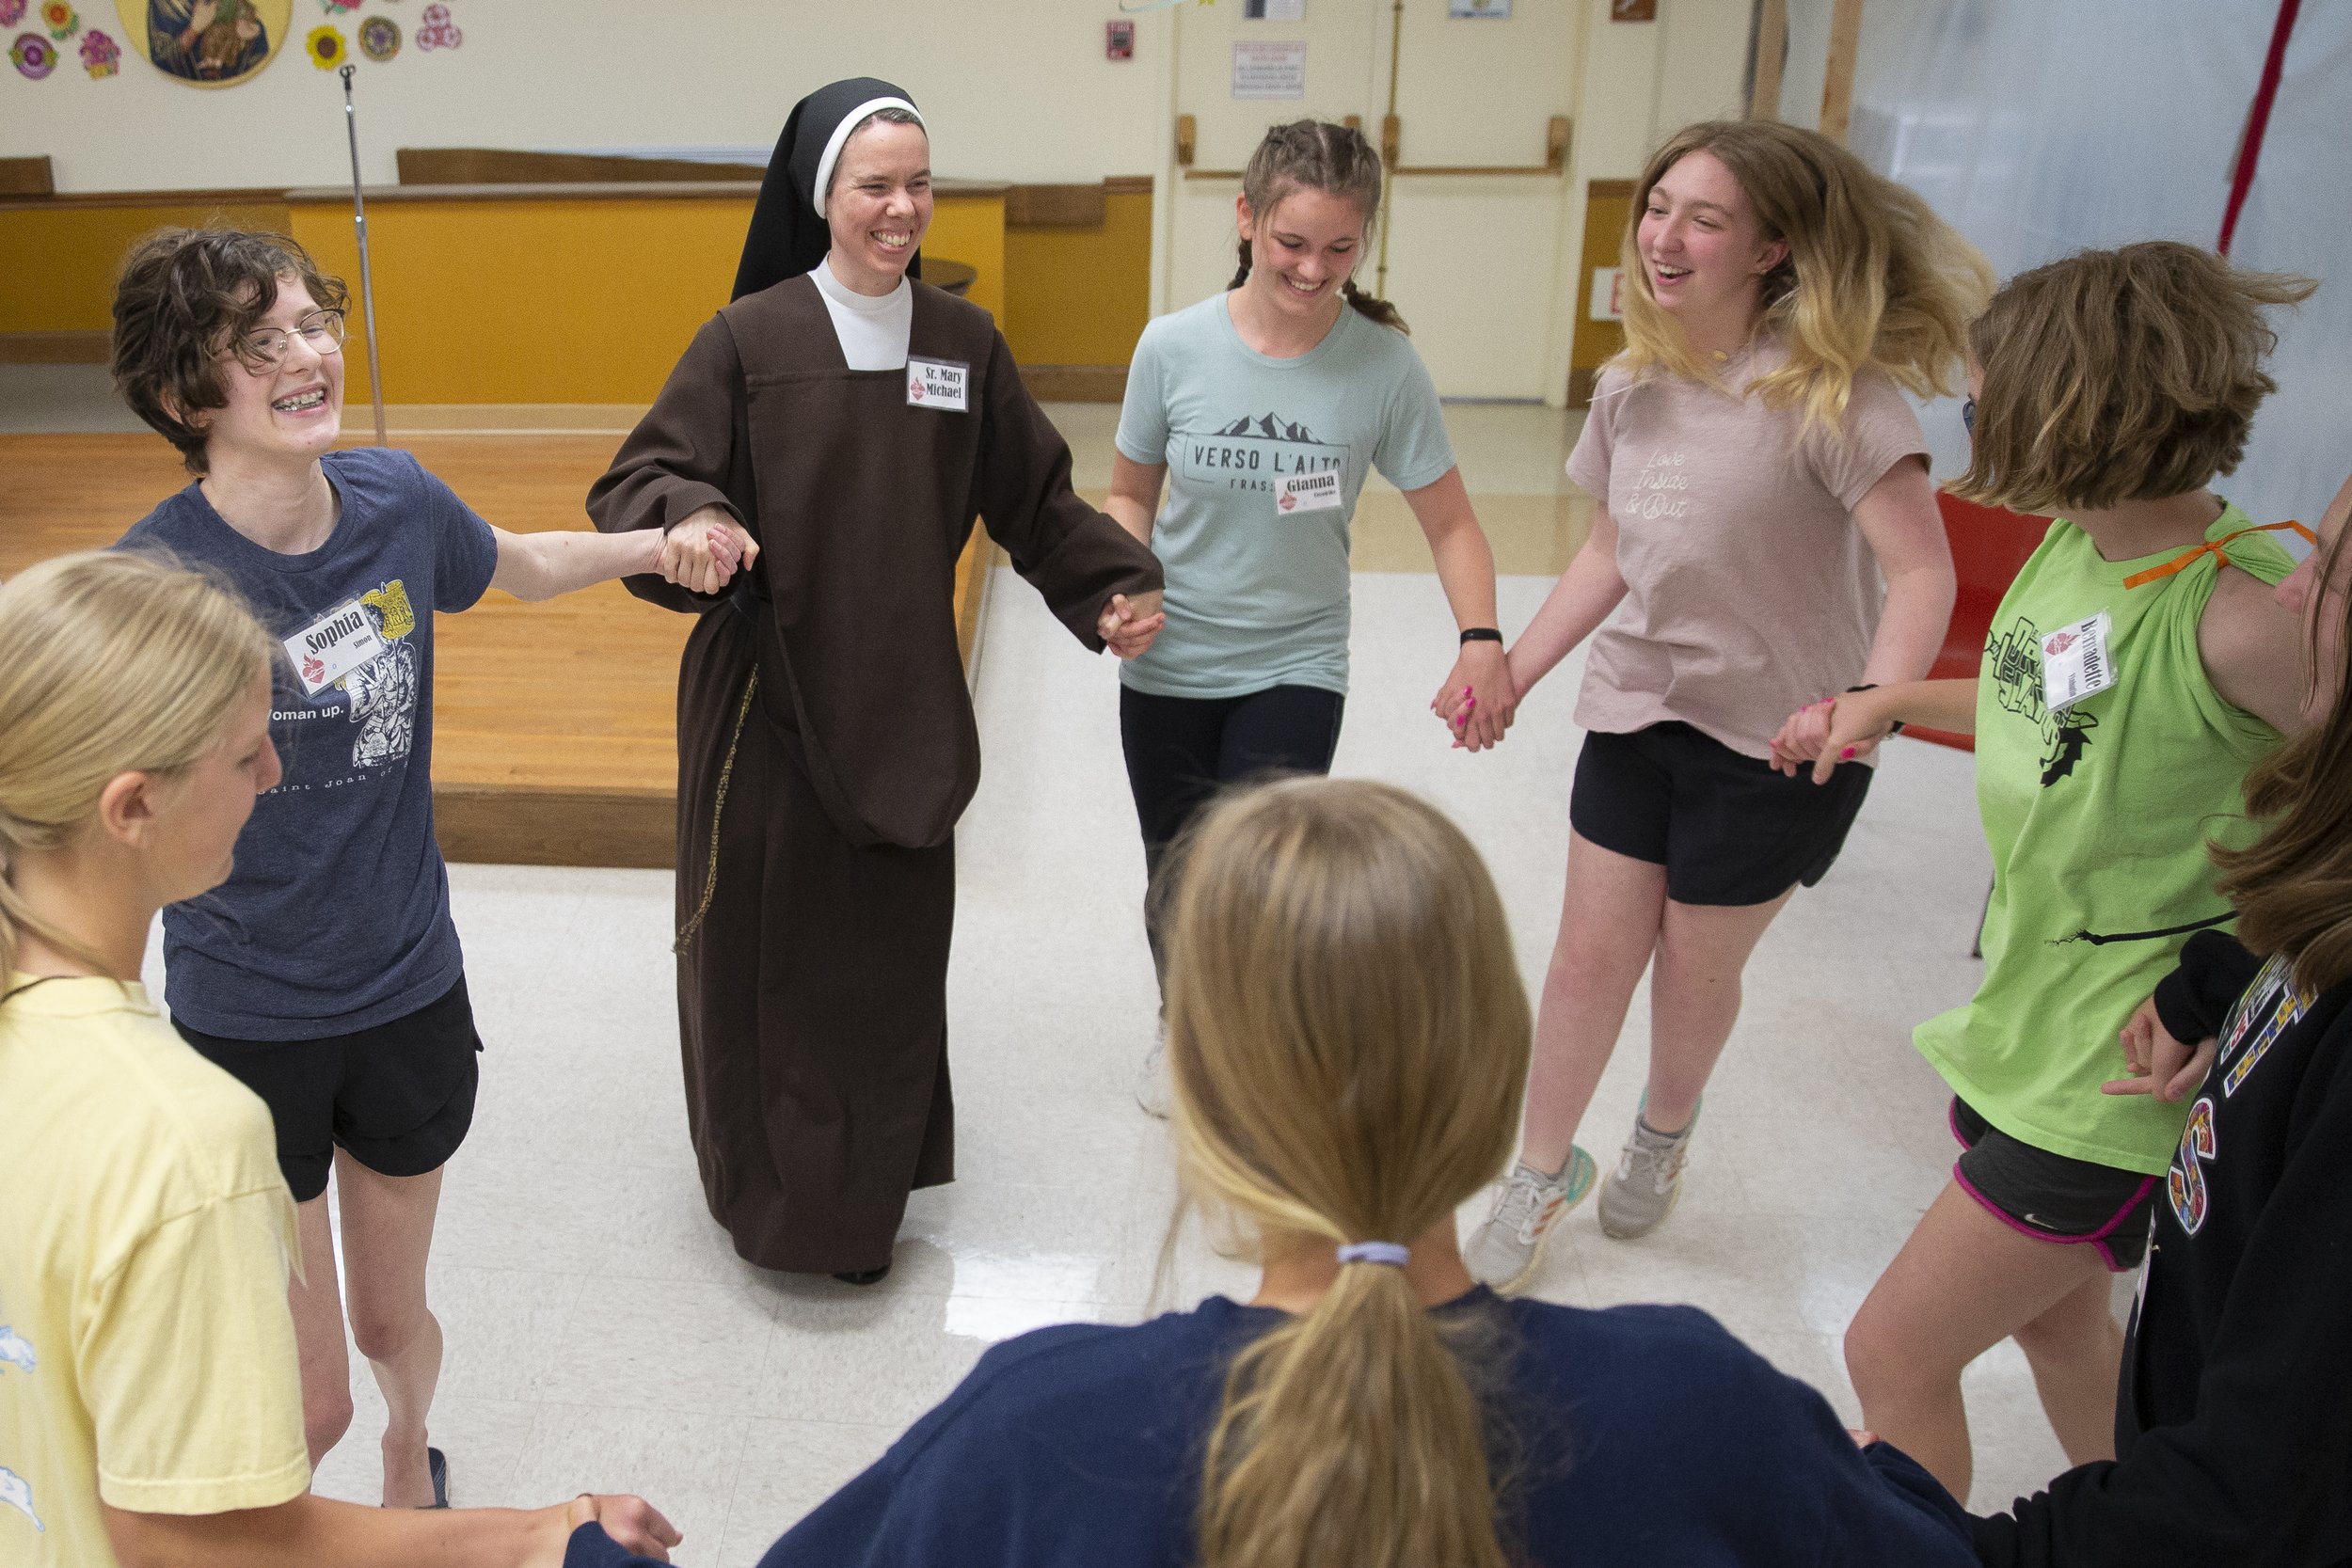  Facing camera from left: Sophia Simon, Sister Mary Michael, Gianna Citrowske and Gia Vorwerk smiled while Irish dancing during Carmelite Day on May 21 at St. Agnes Home in Kirkwood, Missouri. Sister Mary Michael said the purpose of Carmelite Day, wh